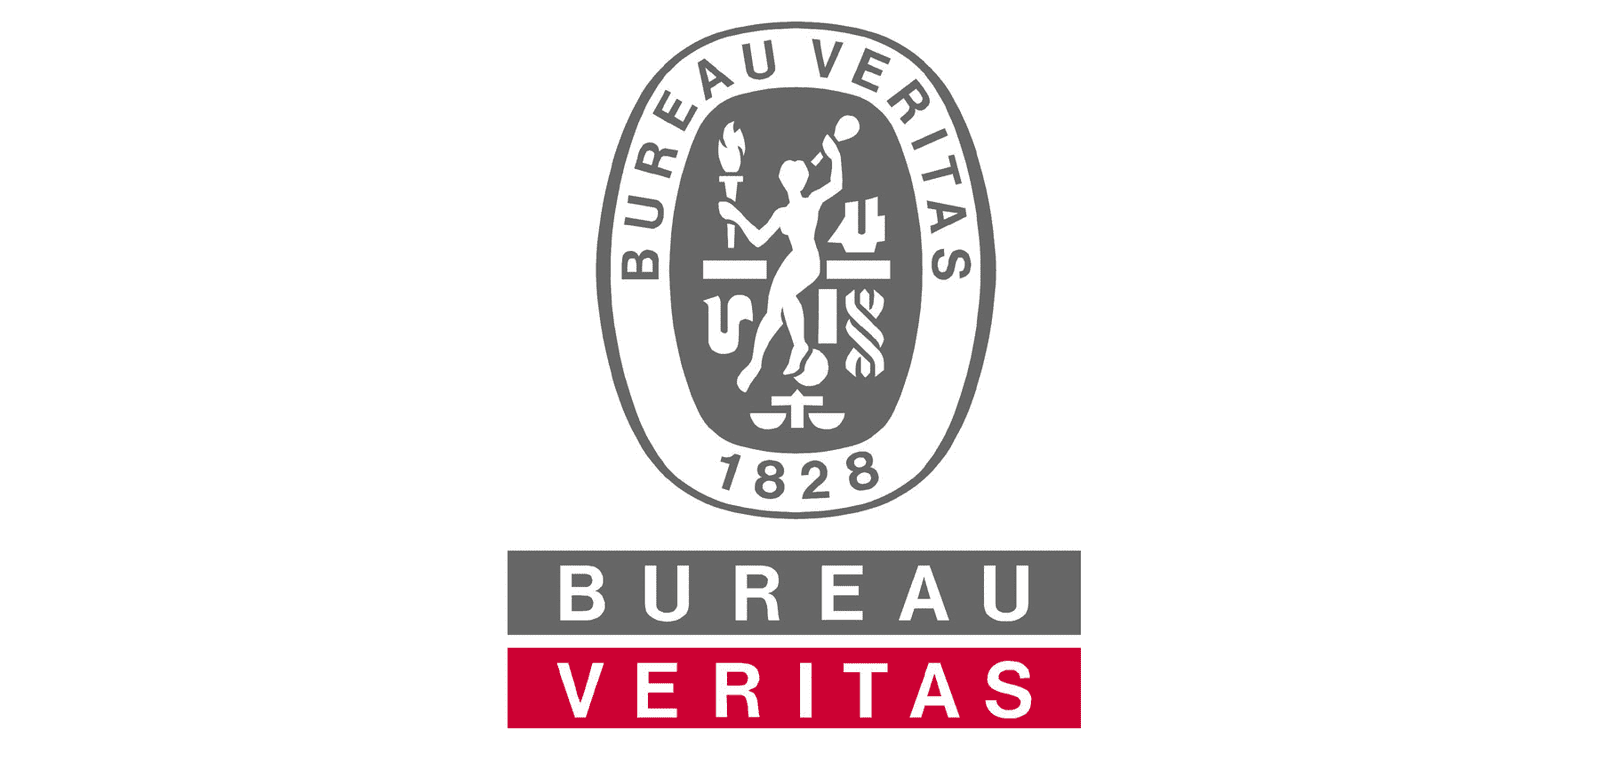 Recognized & partnered with Bureau Veritas as an e-learning provider